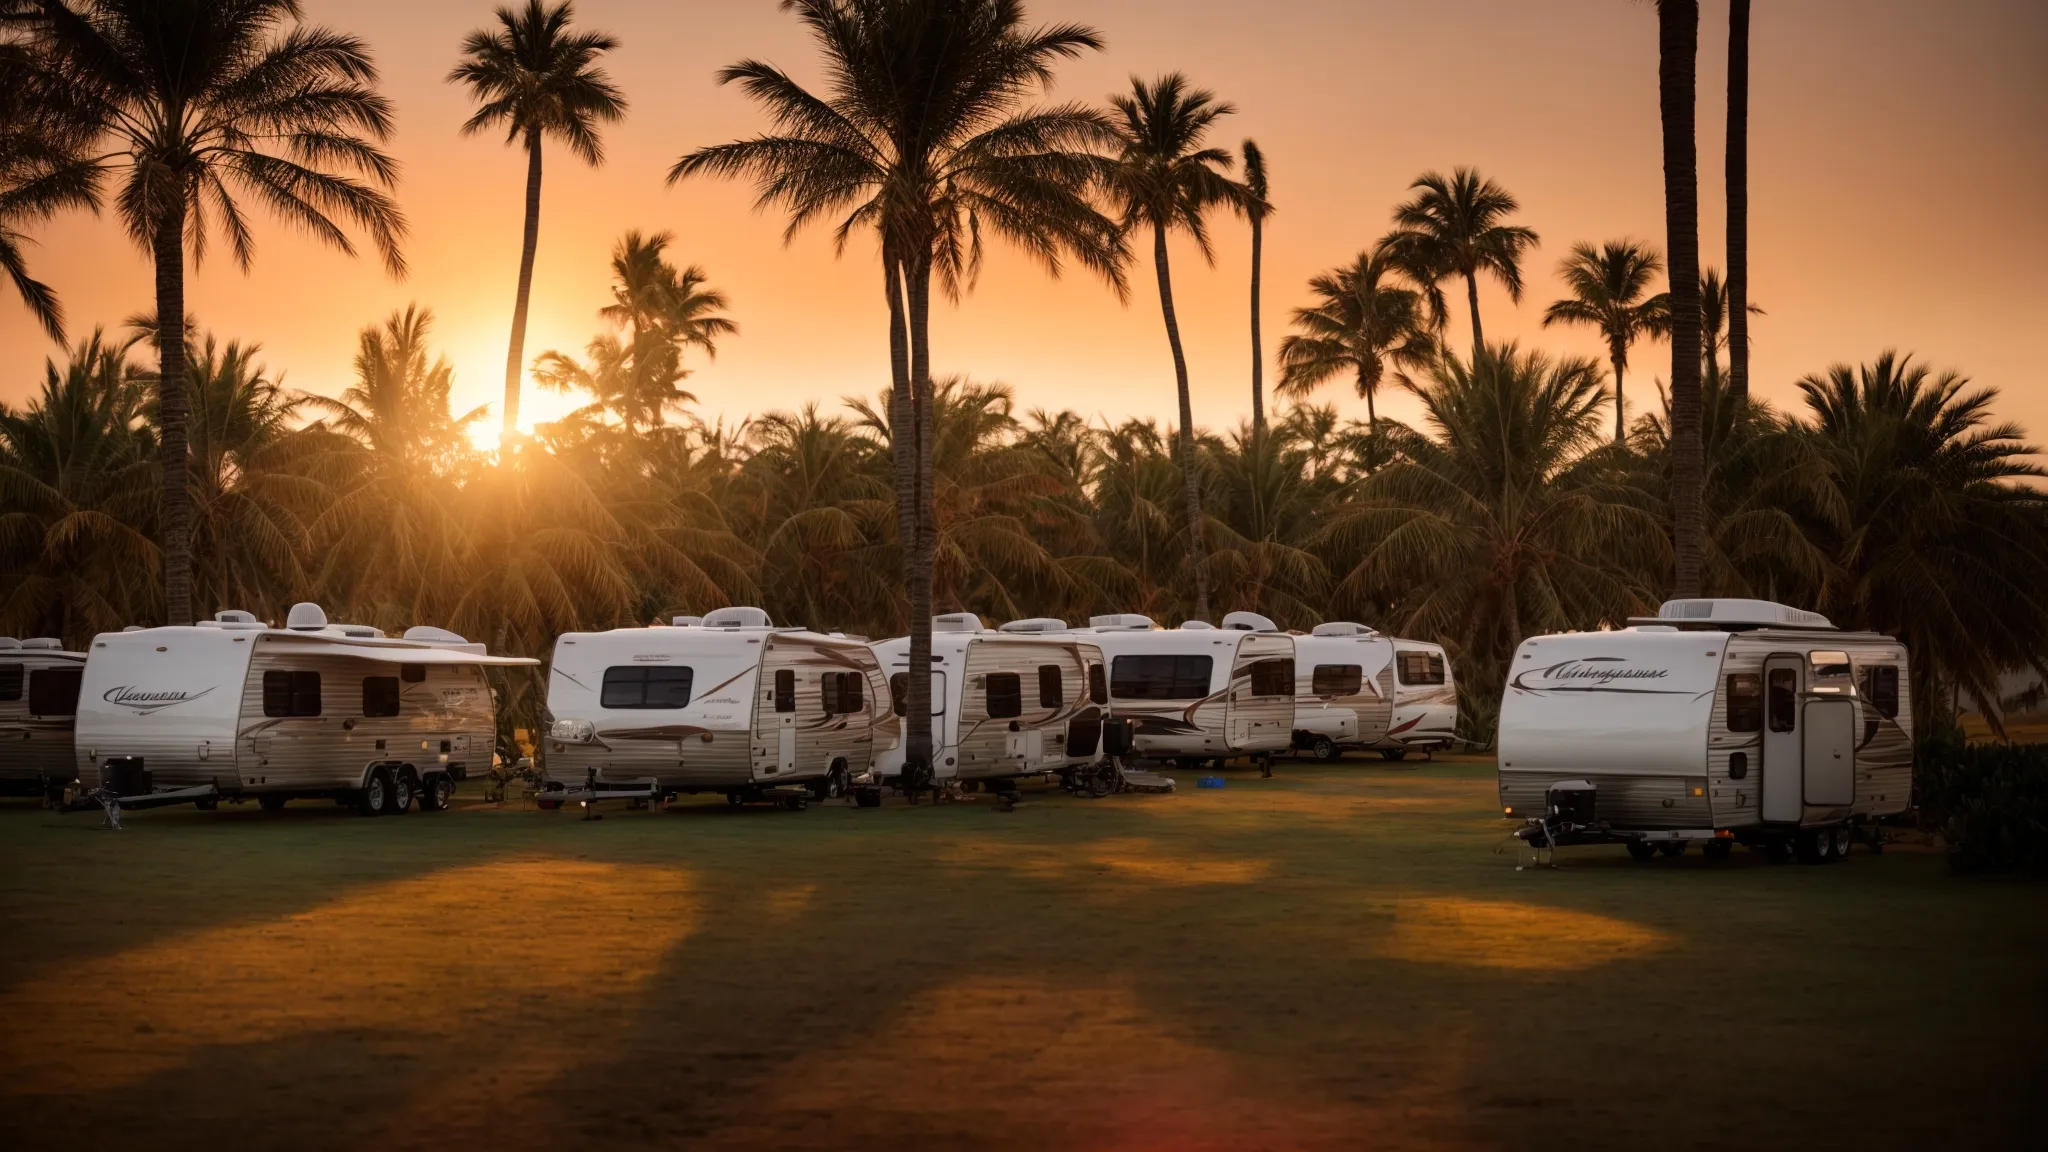 a caravan of rvs nestled among palm trees, with glimpses of the ocean under a radiant sunset.